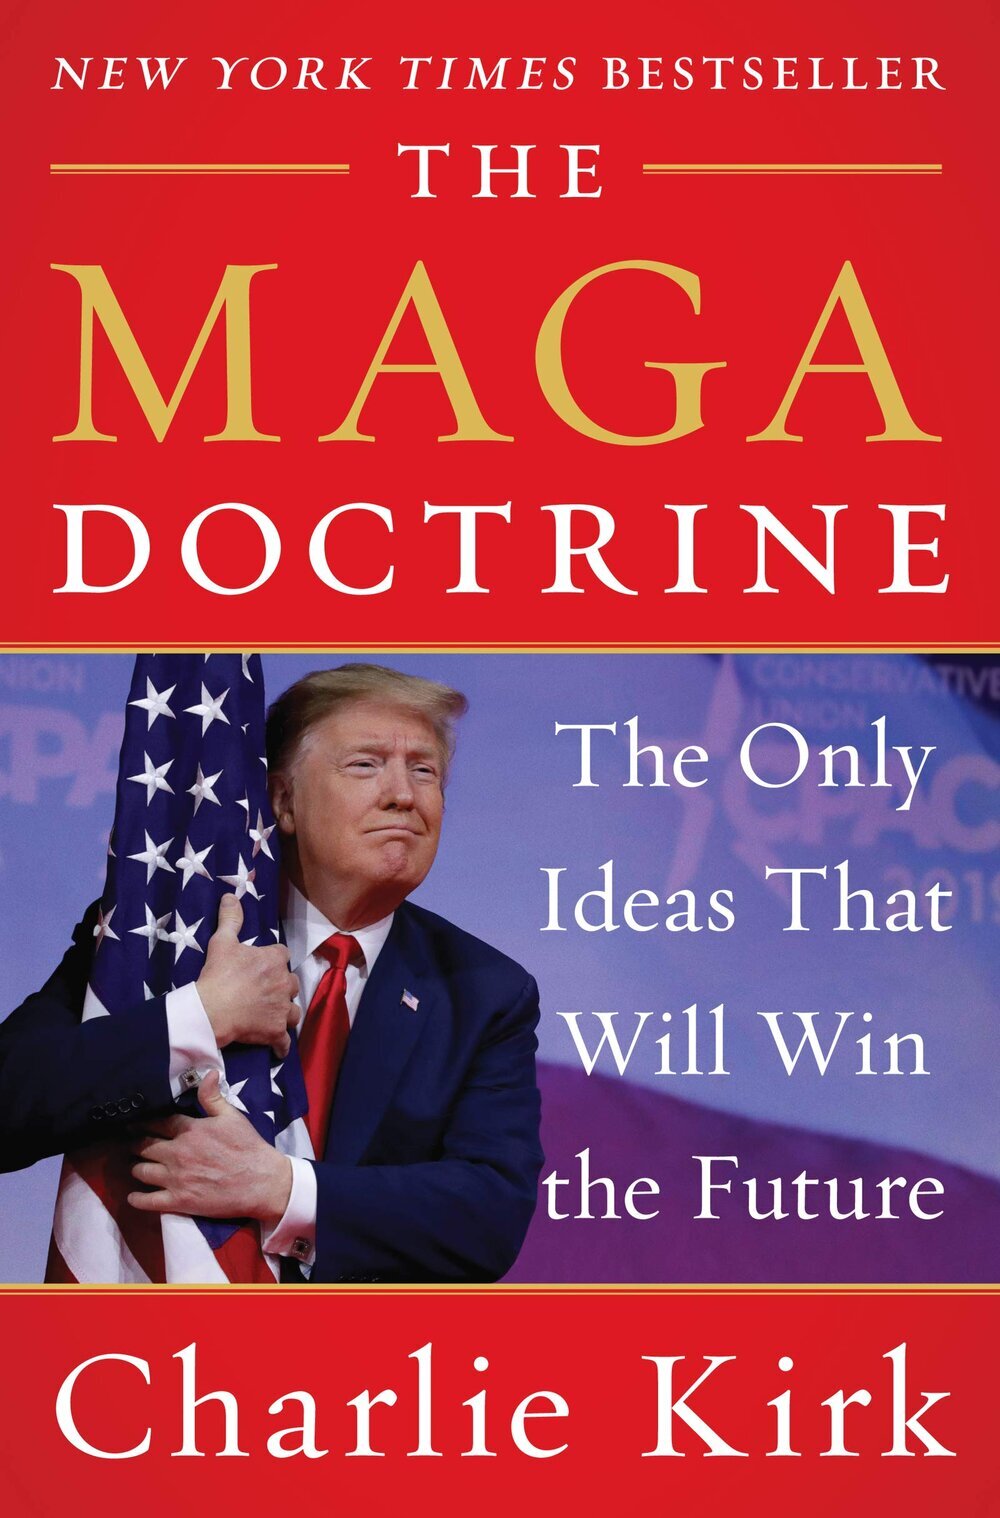 Worst Nonfiction 2020 The MAGA Doctrine The Only Ideas That Will Win the Future by Charlie Kirk.jpg